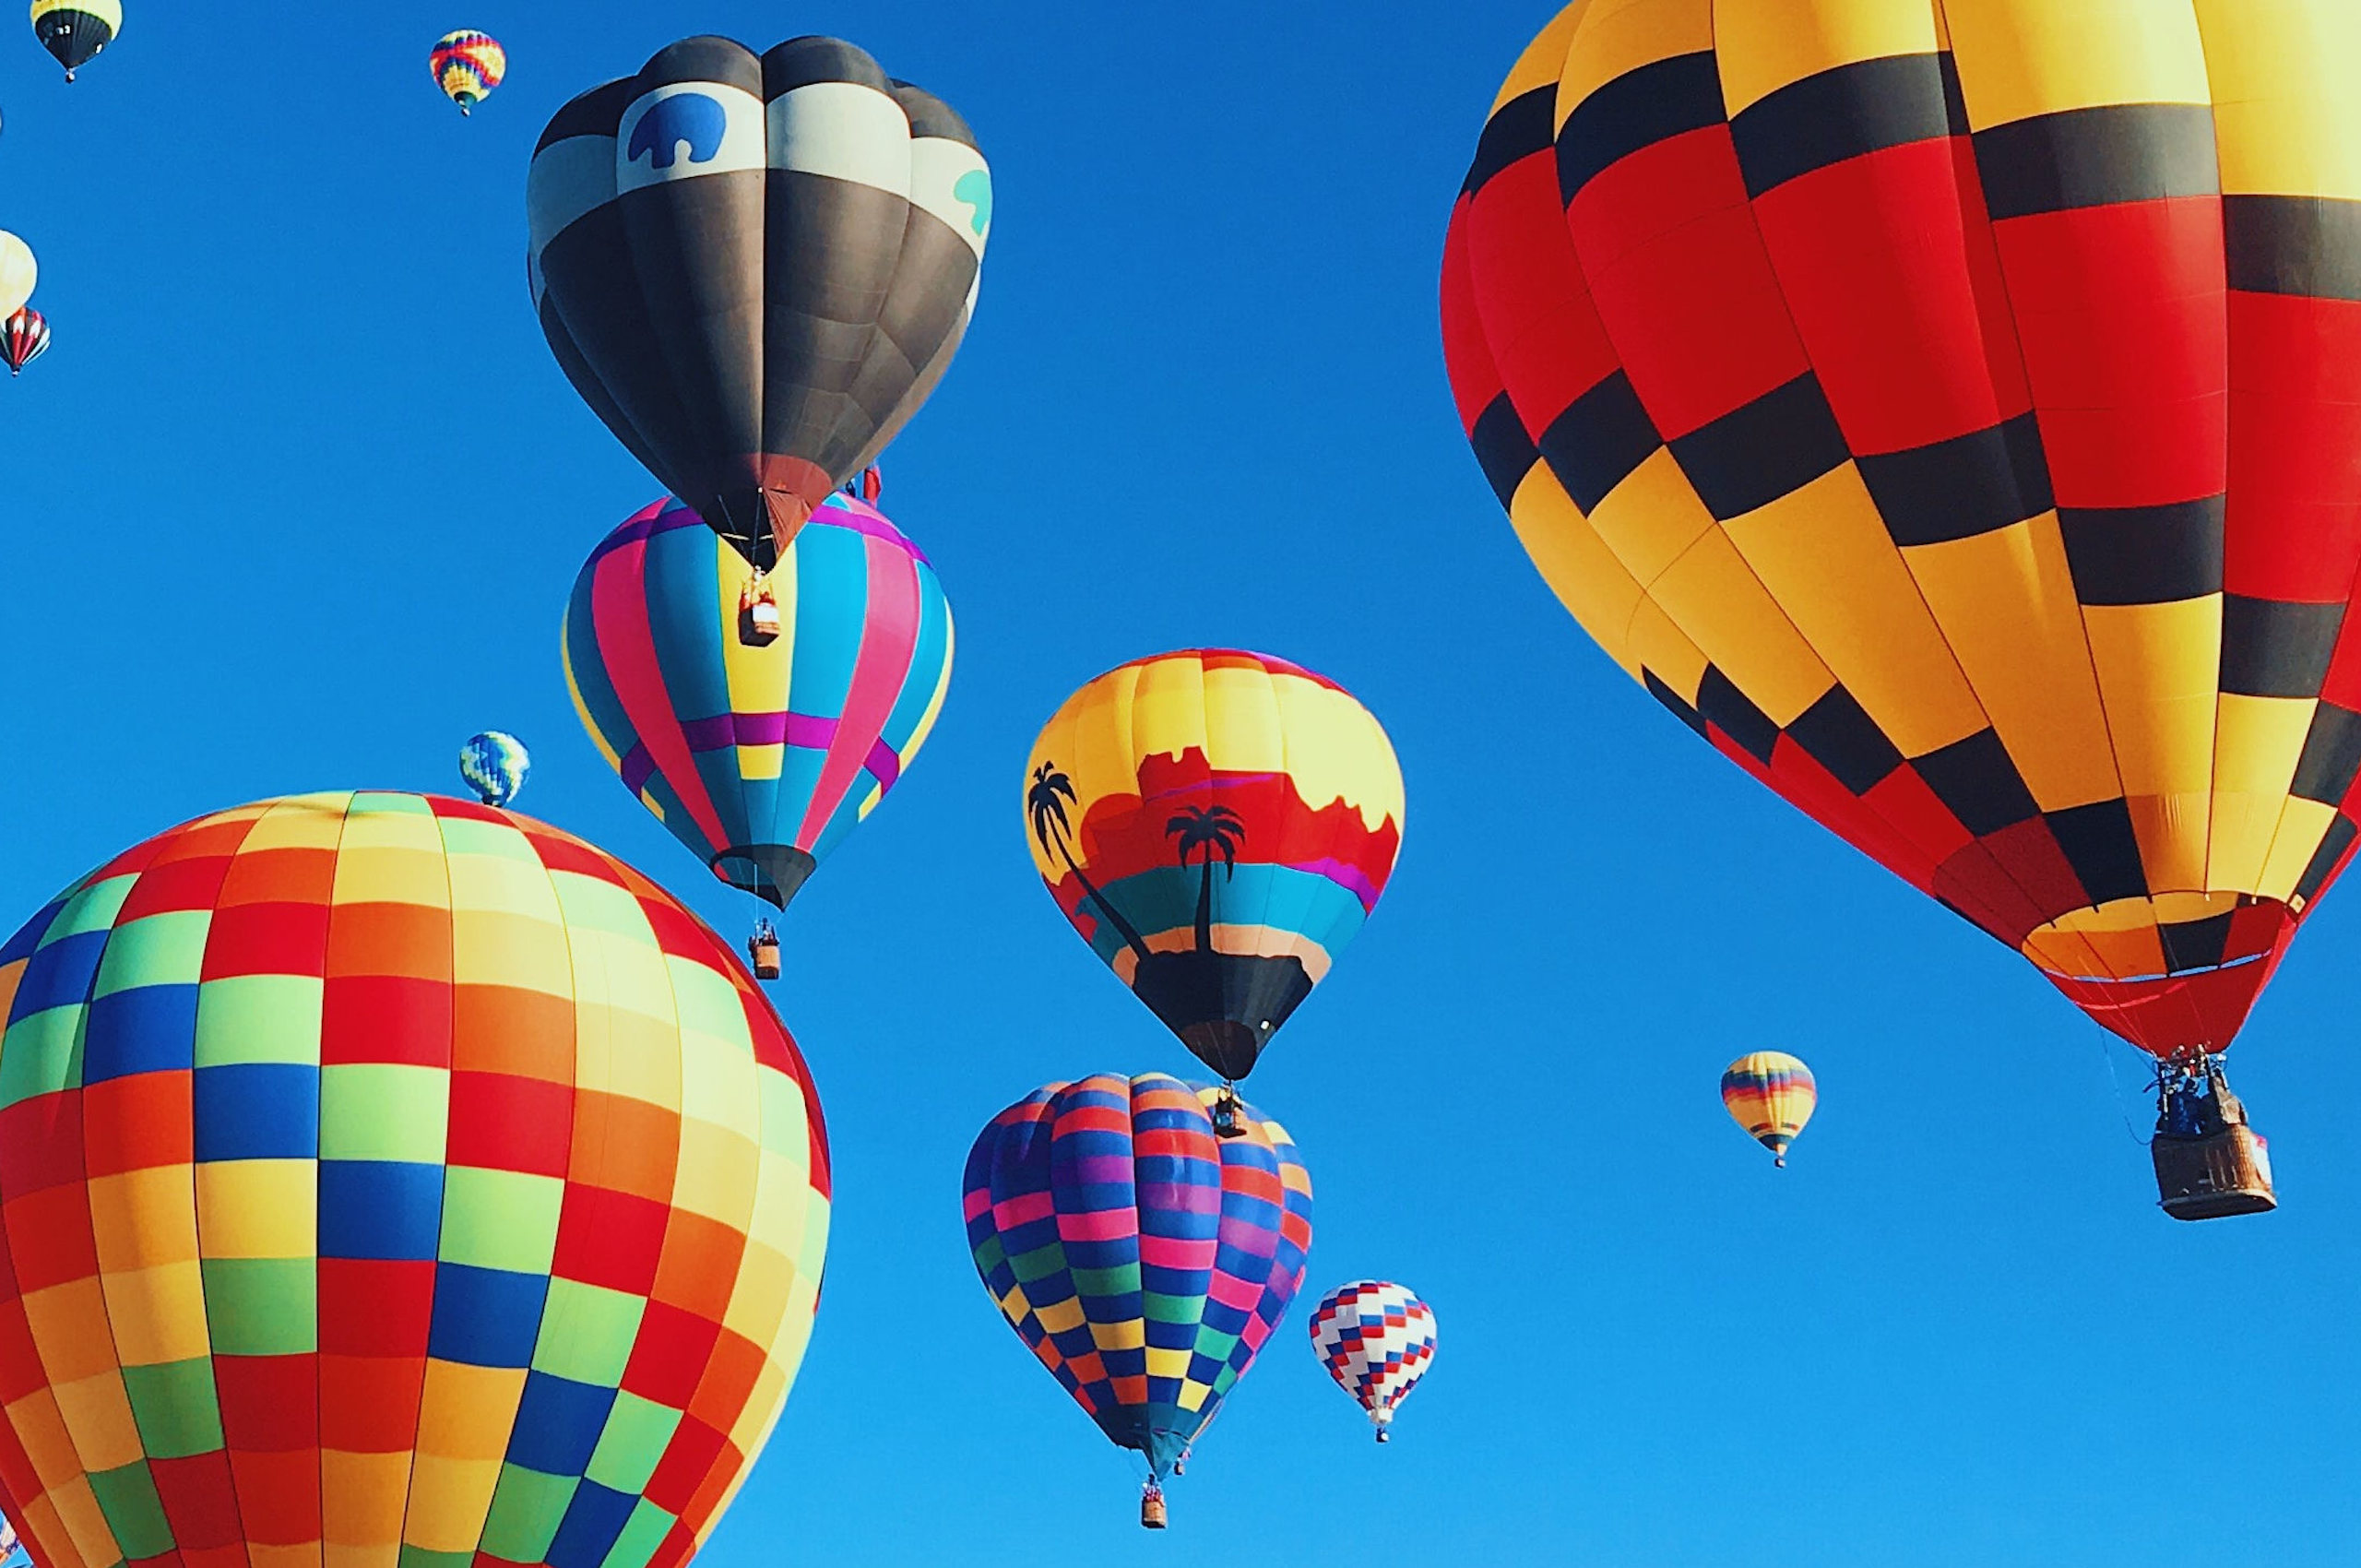 Colourful hot air balloons floating up against a blue sky